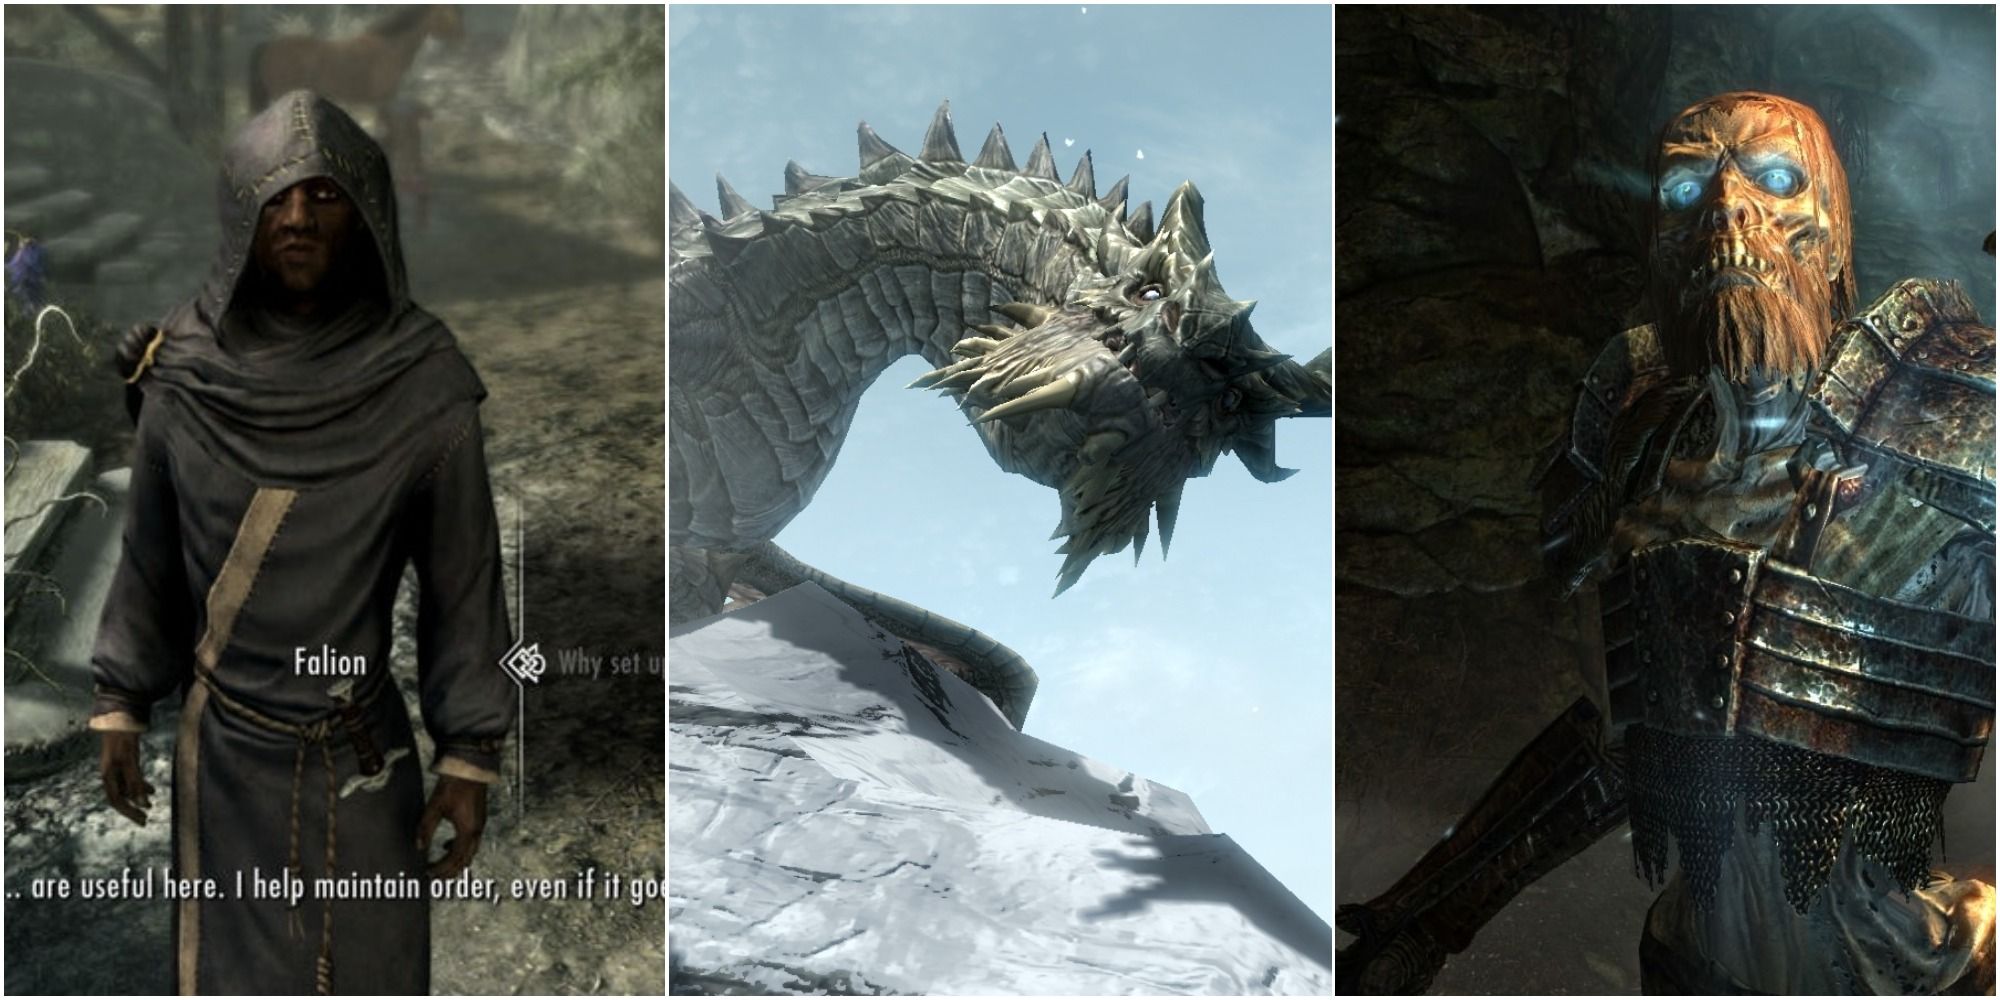 Falion and Paarthurnax may have ulterior motives and draugr just have spooky behavior in skyrim